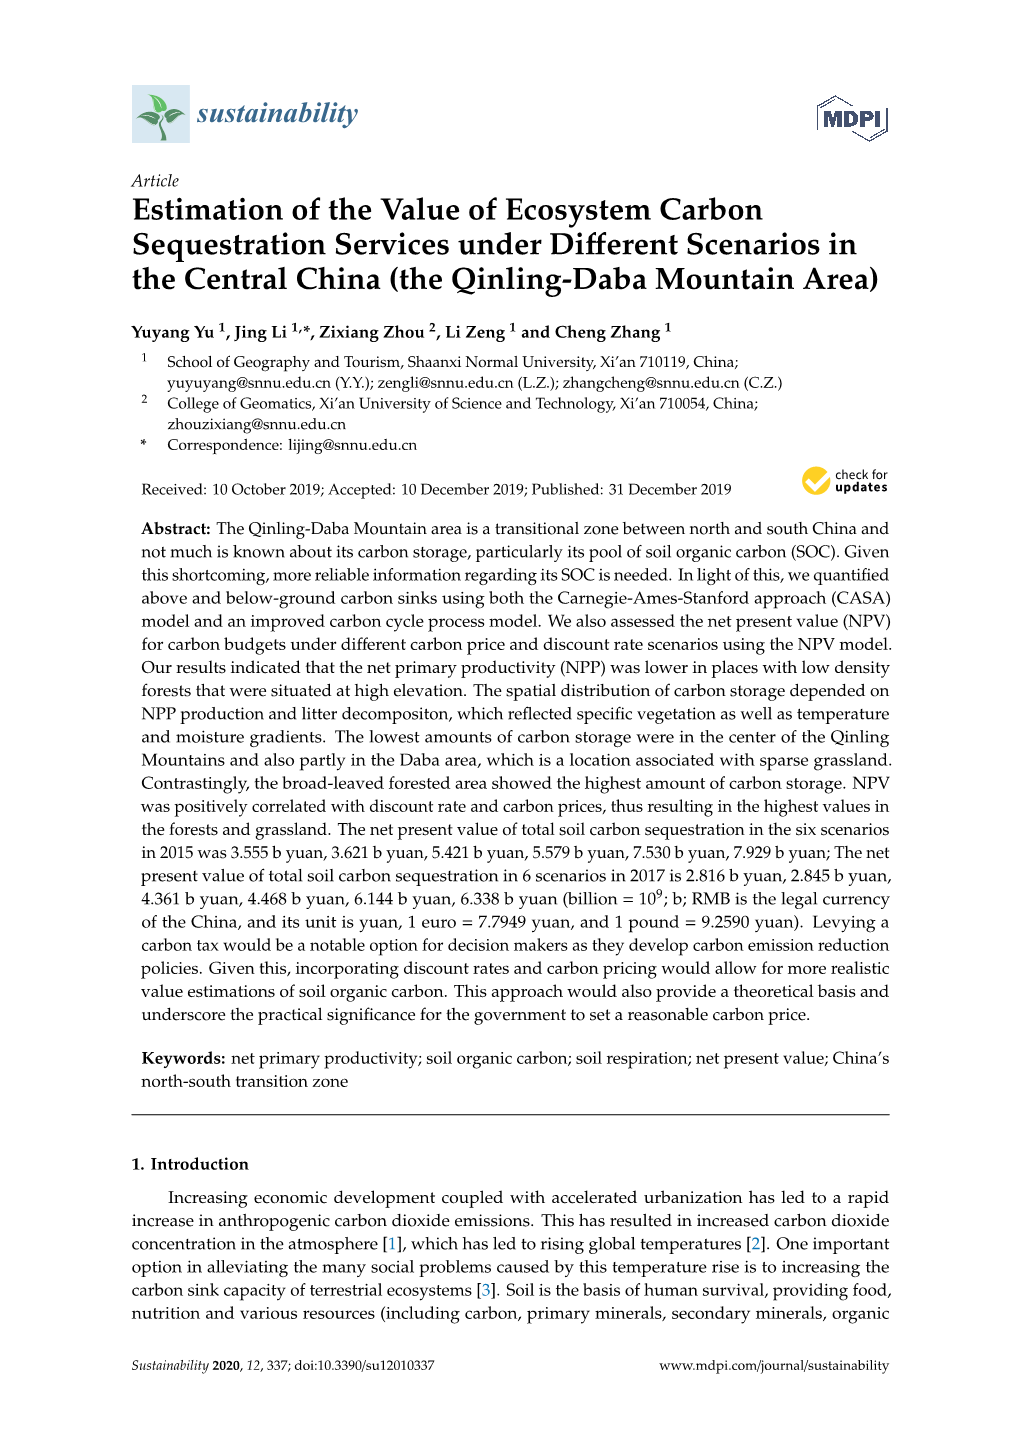 Estimation of the Value of Ecosystem Carbon Sequestration Services Under Diﬀerent Scenarios in the Central China (The Qinling-Daba Mountain Area)